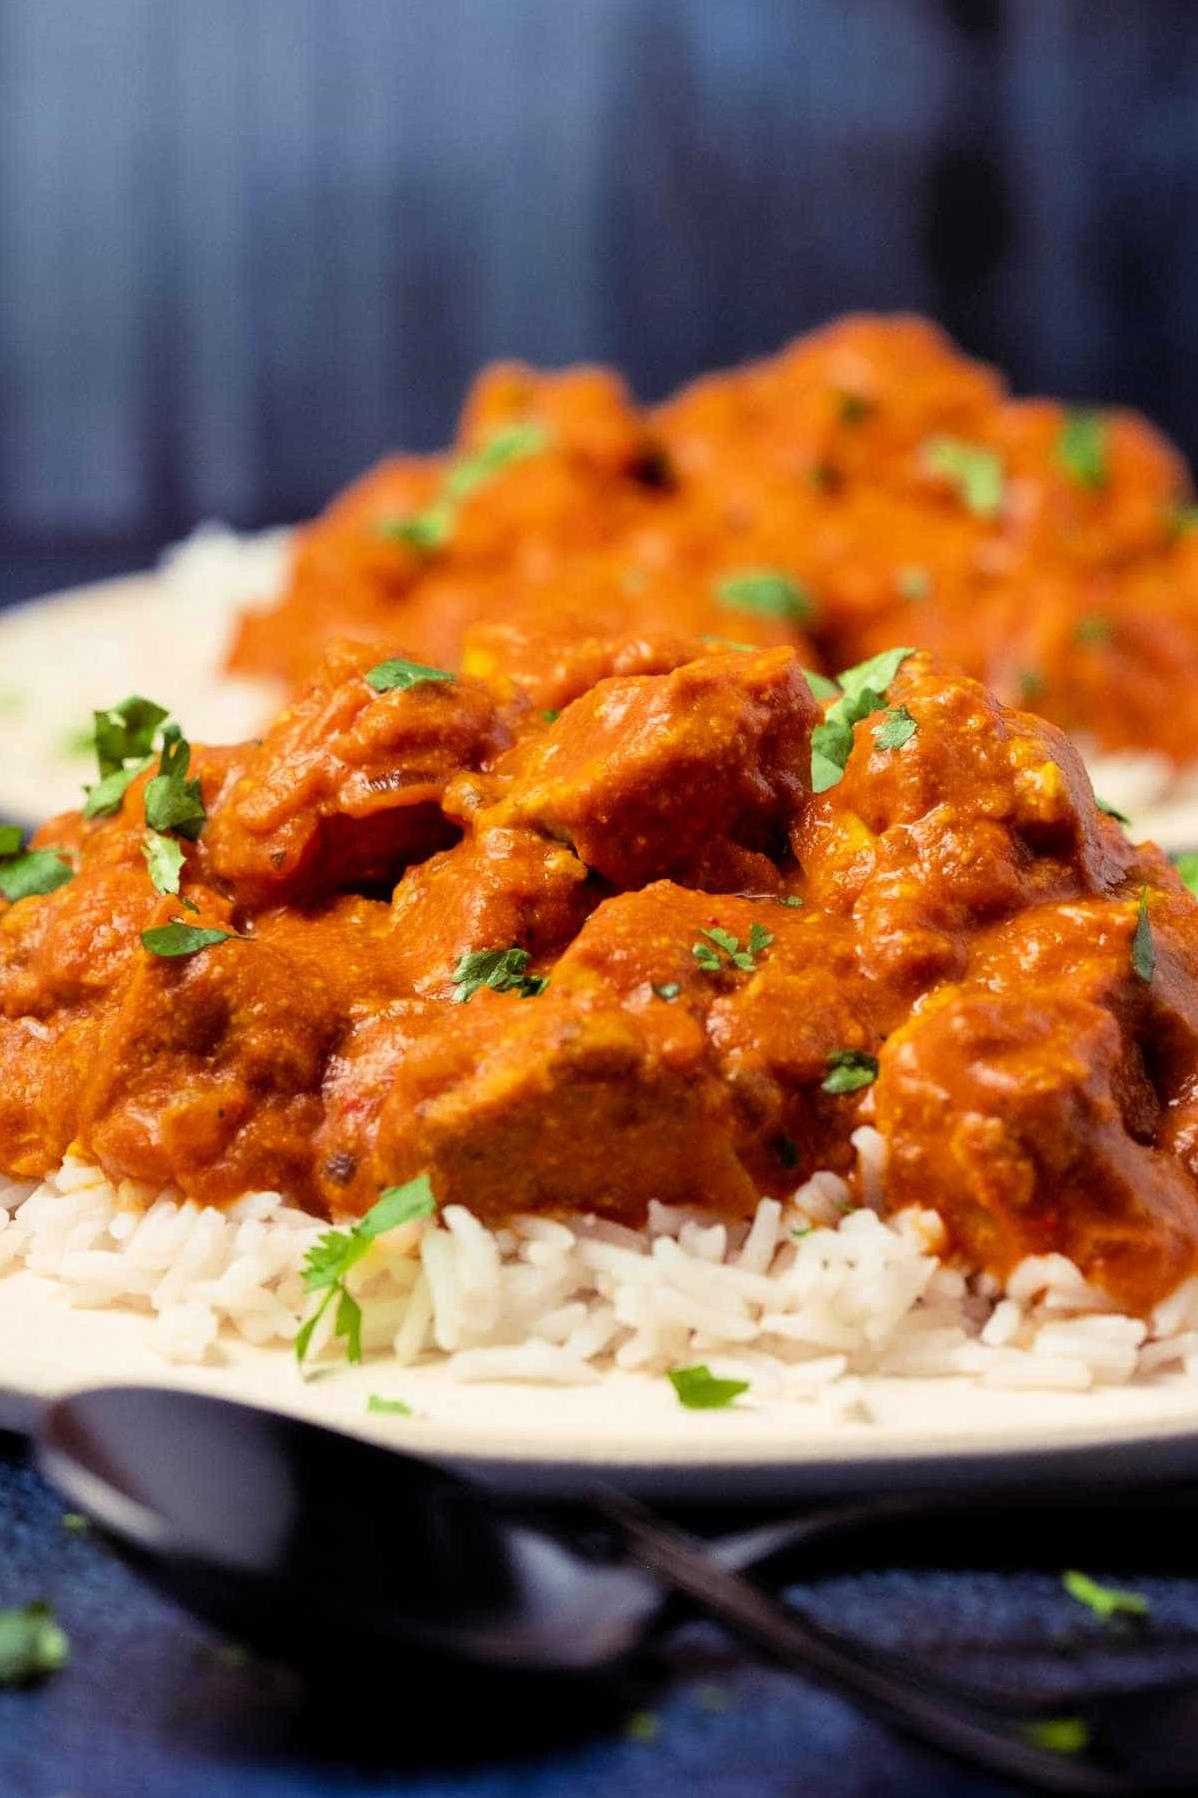  Say goodbye to gluttonous recipes and satisfy your cravings with this healthy, nutritious and filling gluten-free vegan tikka masala.